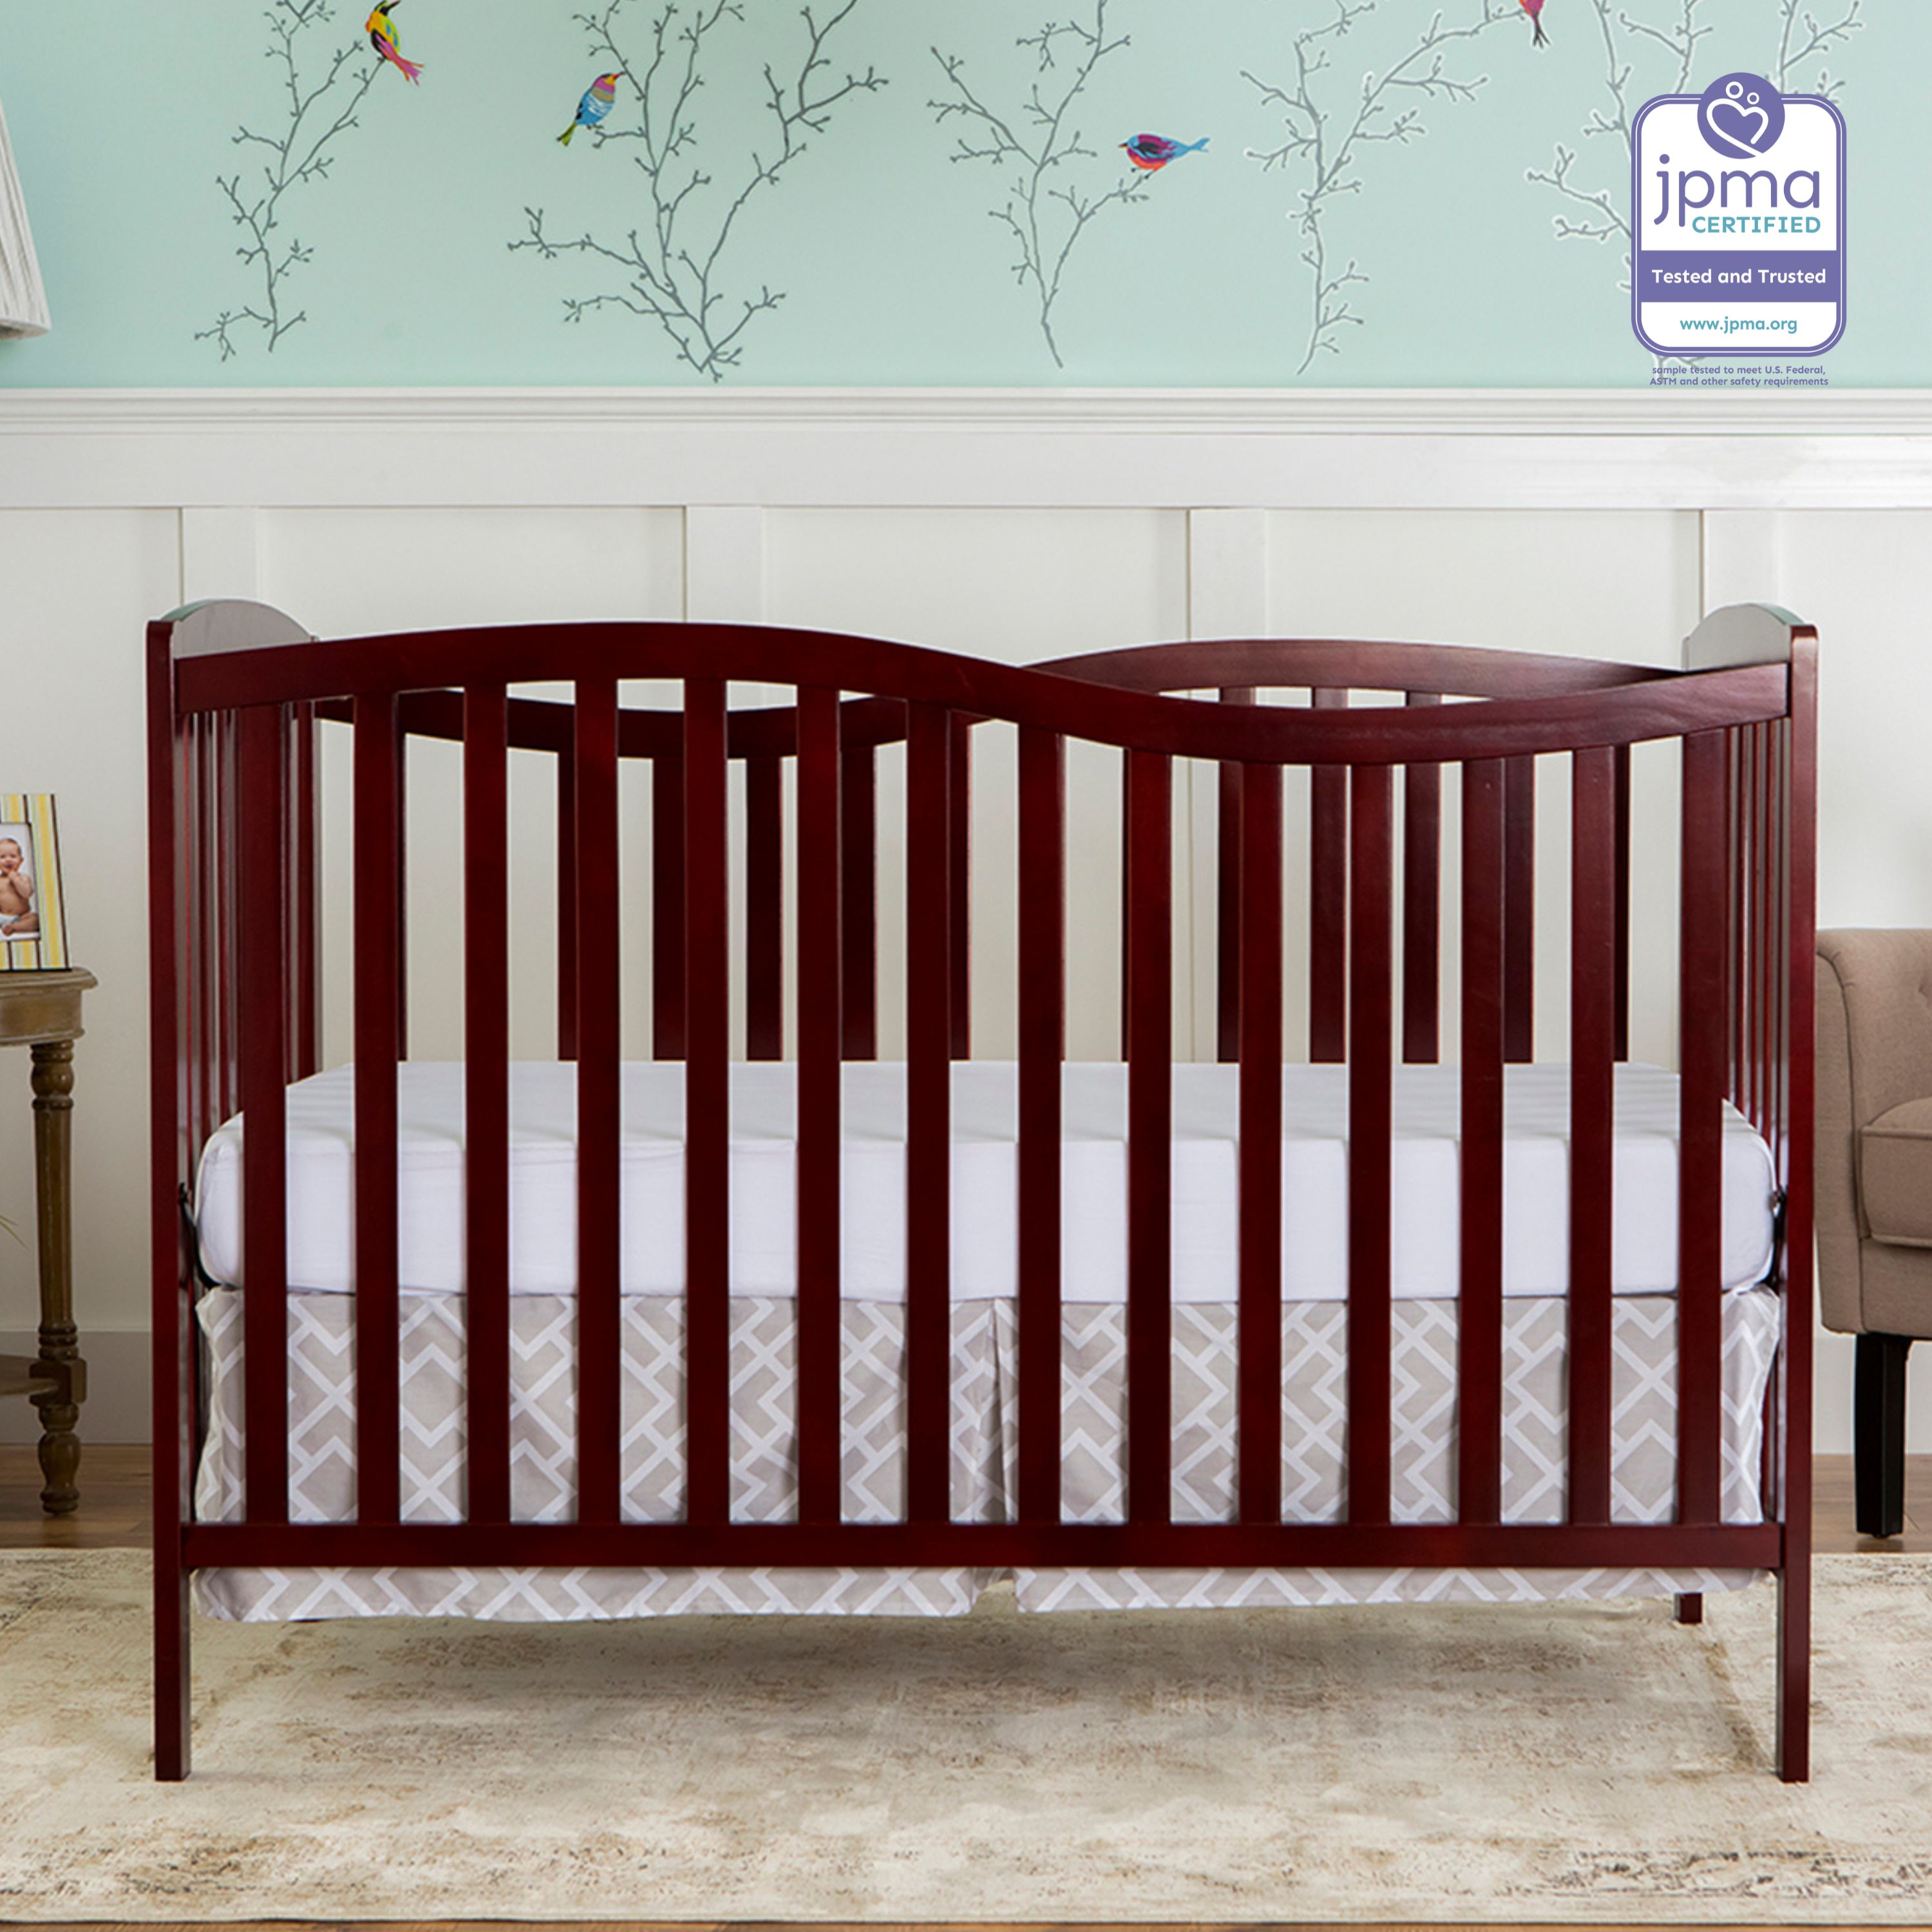 Dream On Me Chelsea 5-in-1 Convertible Crib, JPMA Certified, Cherry - image 2 of 13